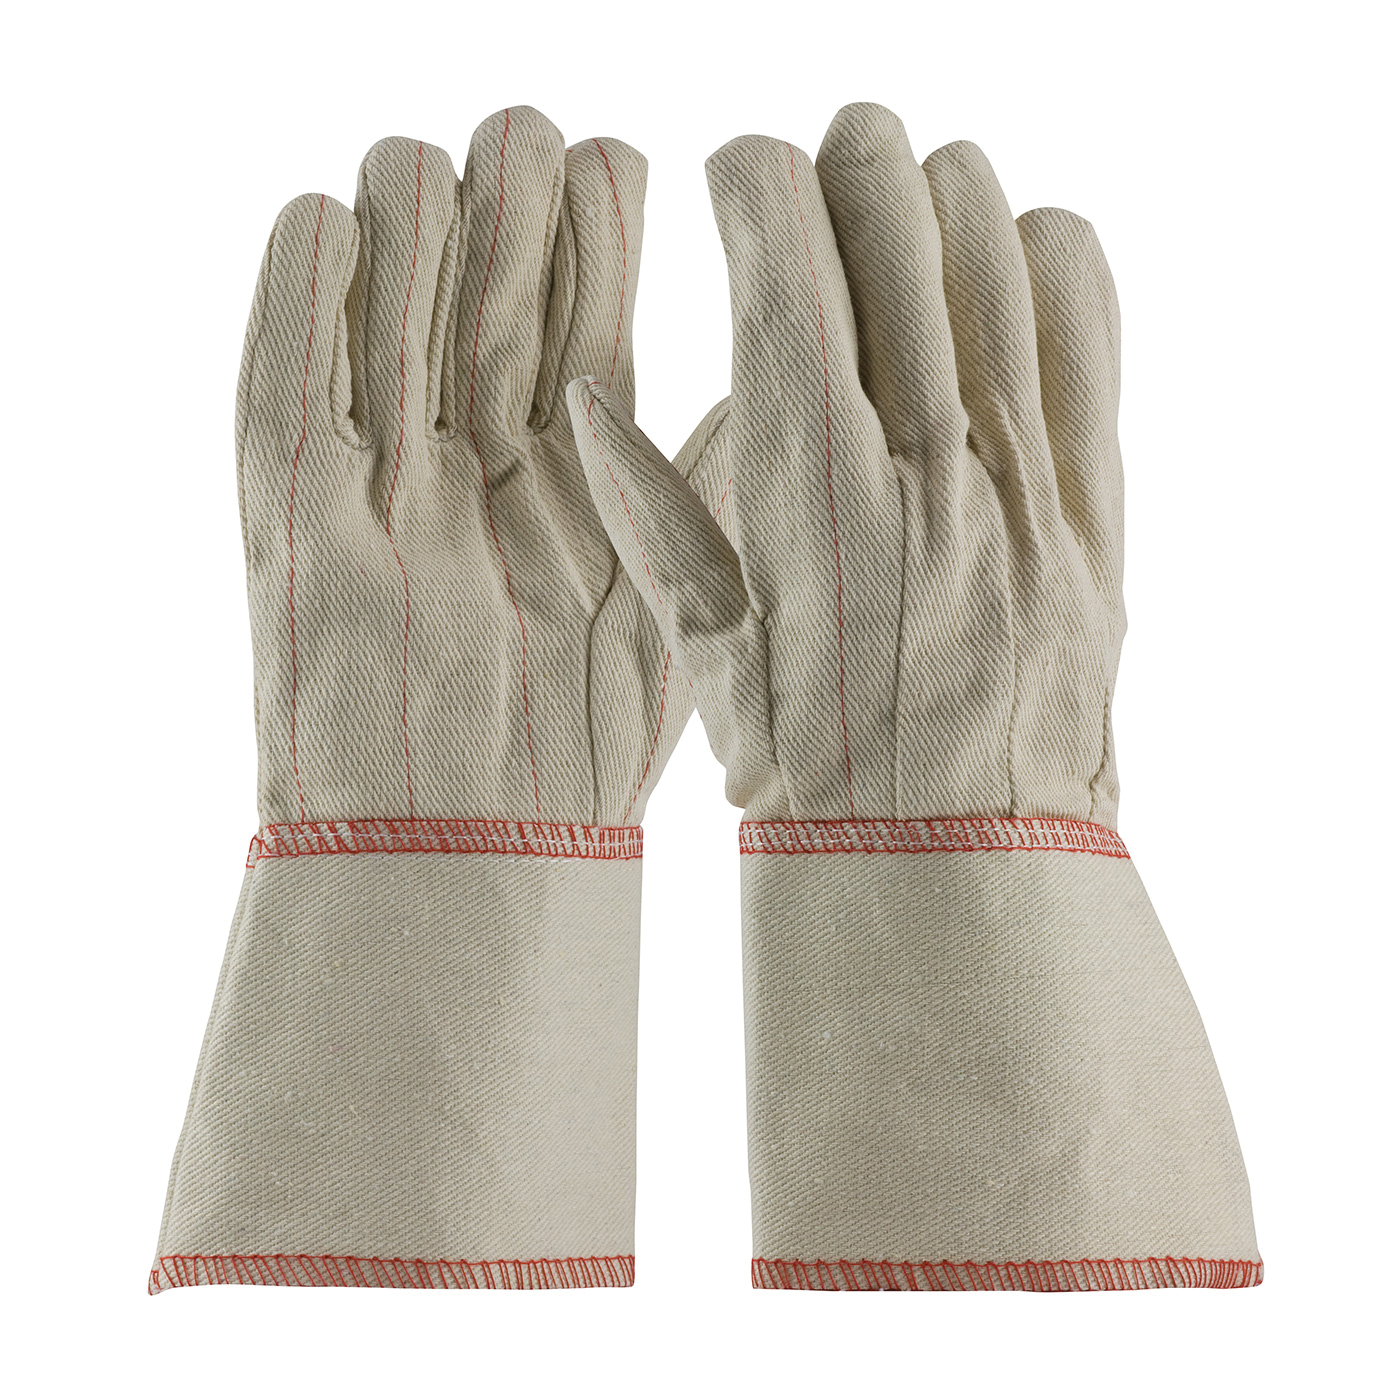 PIP® 92-918G Double Palm Men's General Purpose Gloves, Multi-Purpose/Work, Clute Cut/Full Finger/Nap-In/Straight Thumb Style, Universal, Cotton/Canvas Palm, 60% Cotton/40% Polyester, Natural, Gauntlet Cuff, Uncoated Coating, Resists: Abrasion